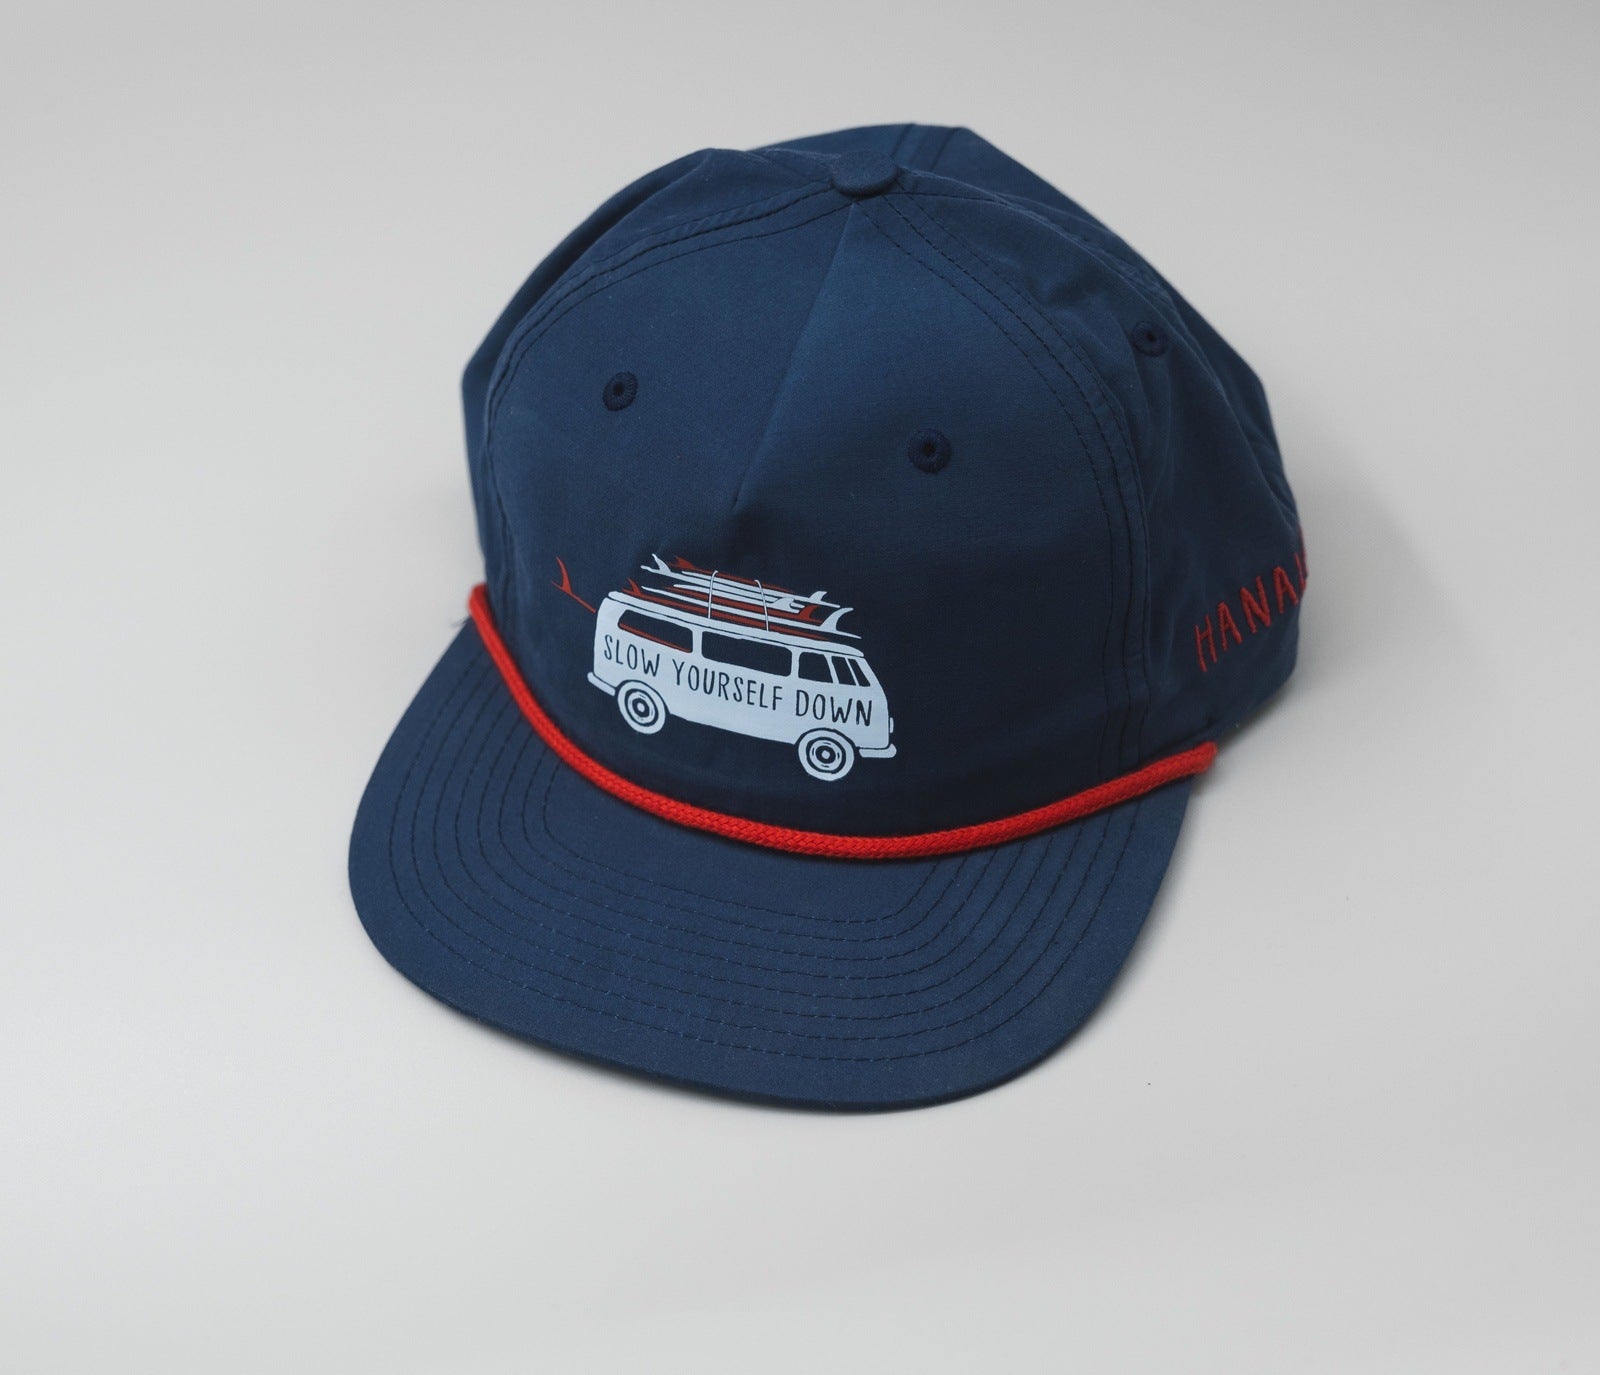 Surf Van Boaters Hat Hats - Slow Yourself Down